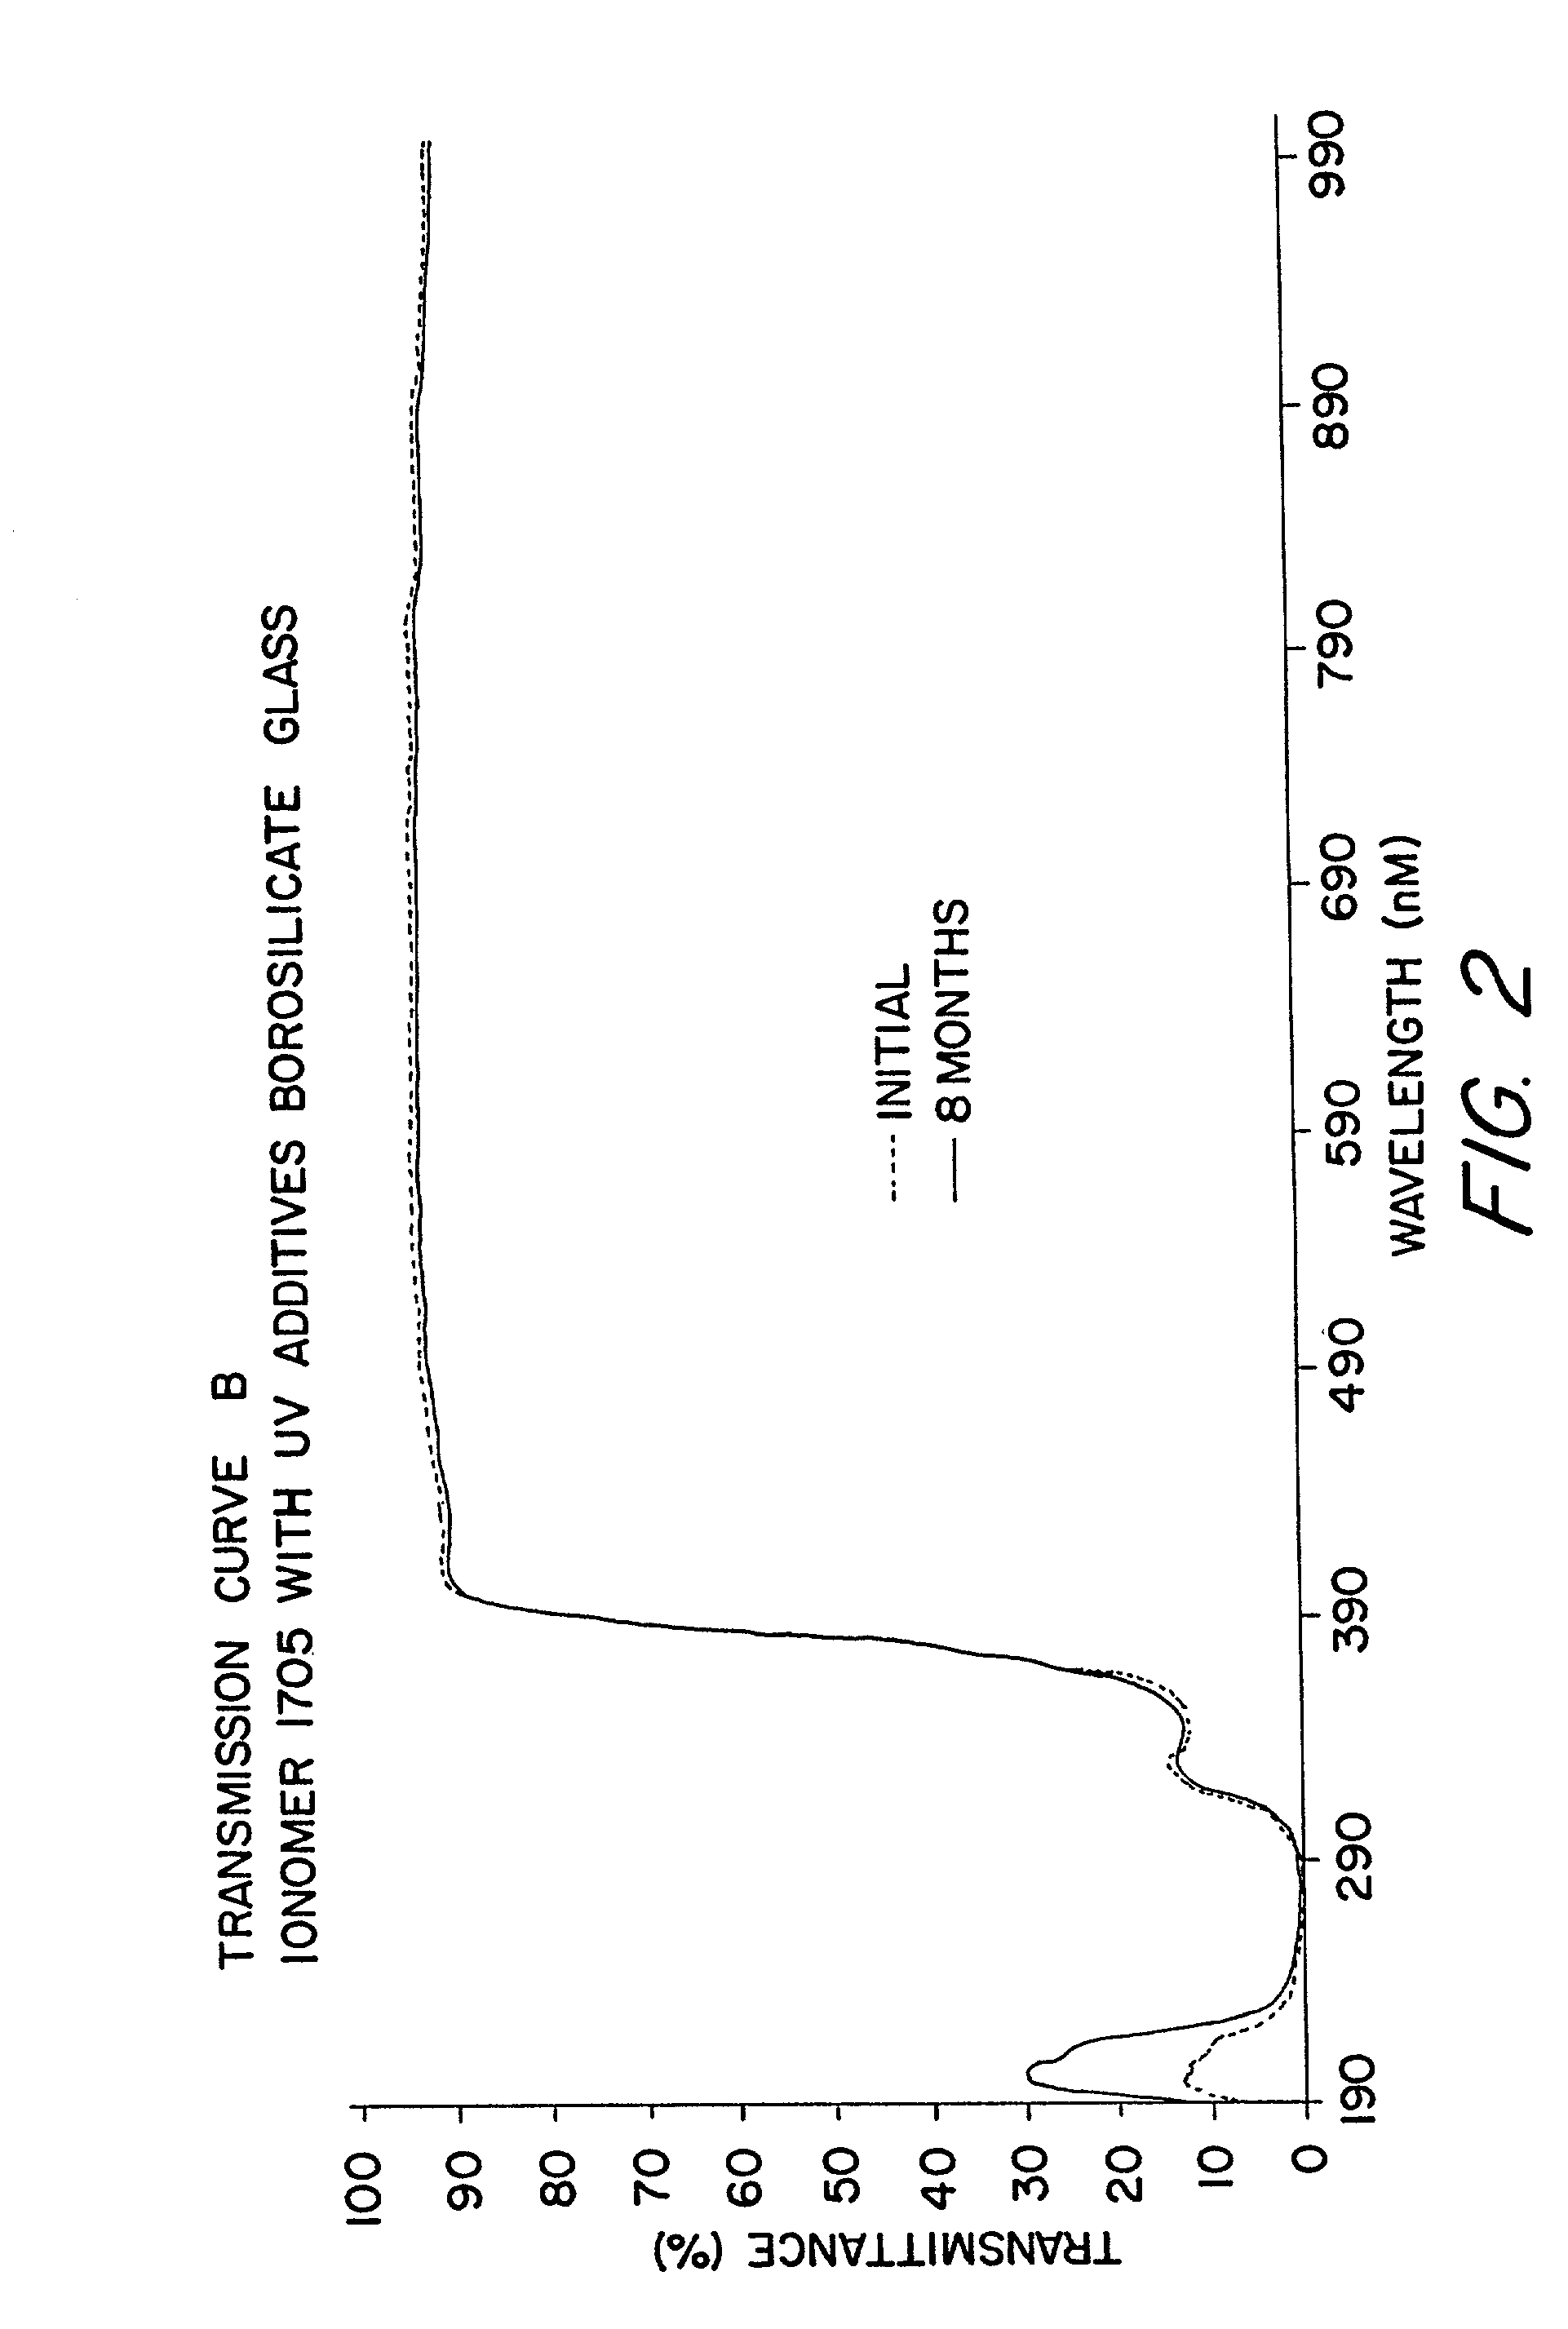 Encapsulated photovoltaic modules and method of manufacturing same